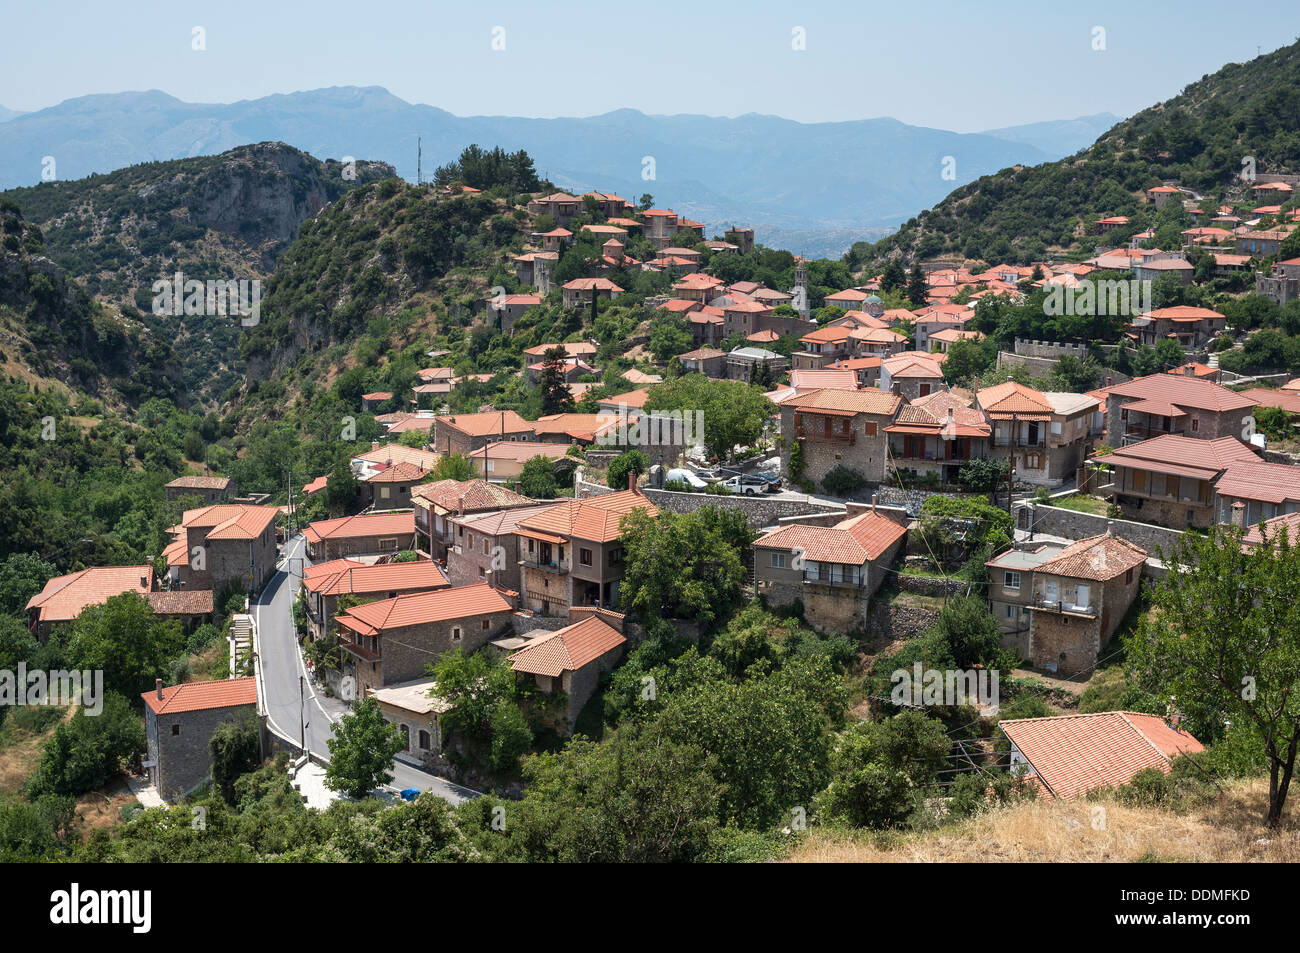 The Village of Stemnitsa, in Arcadia, central Peloponnese, Greece. Stock Photo